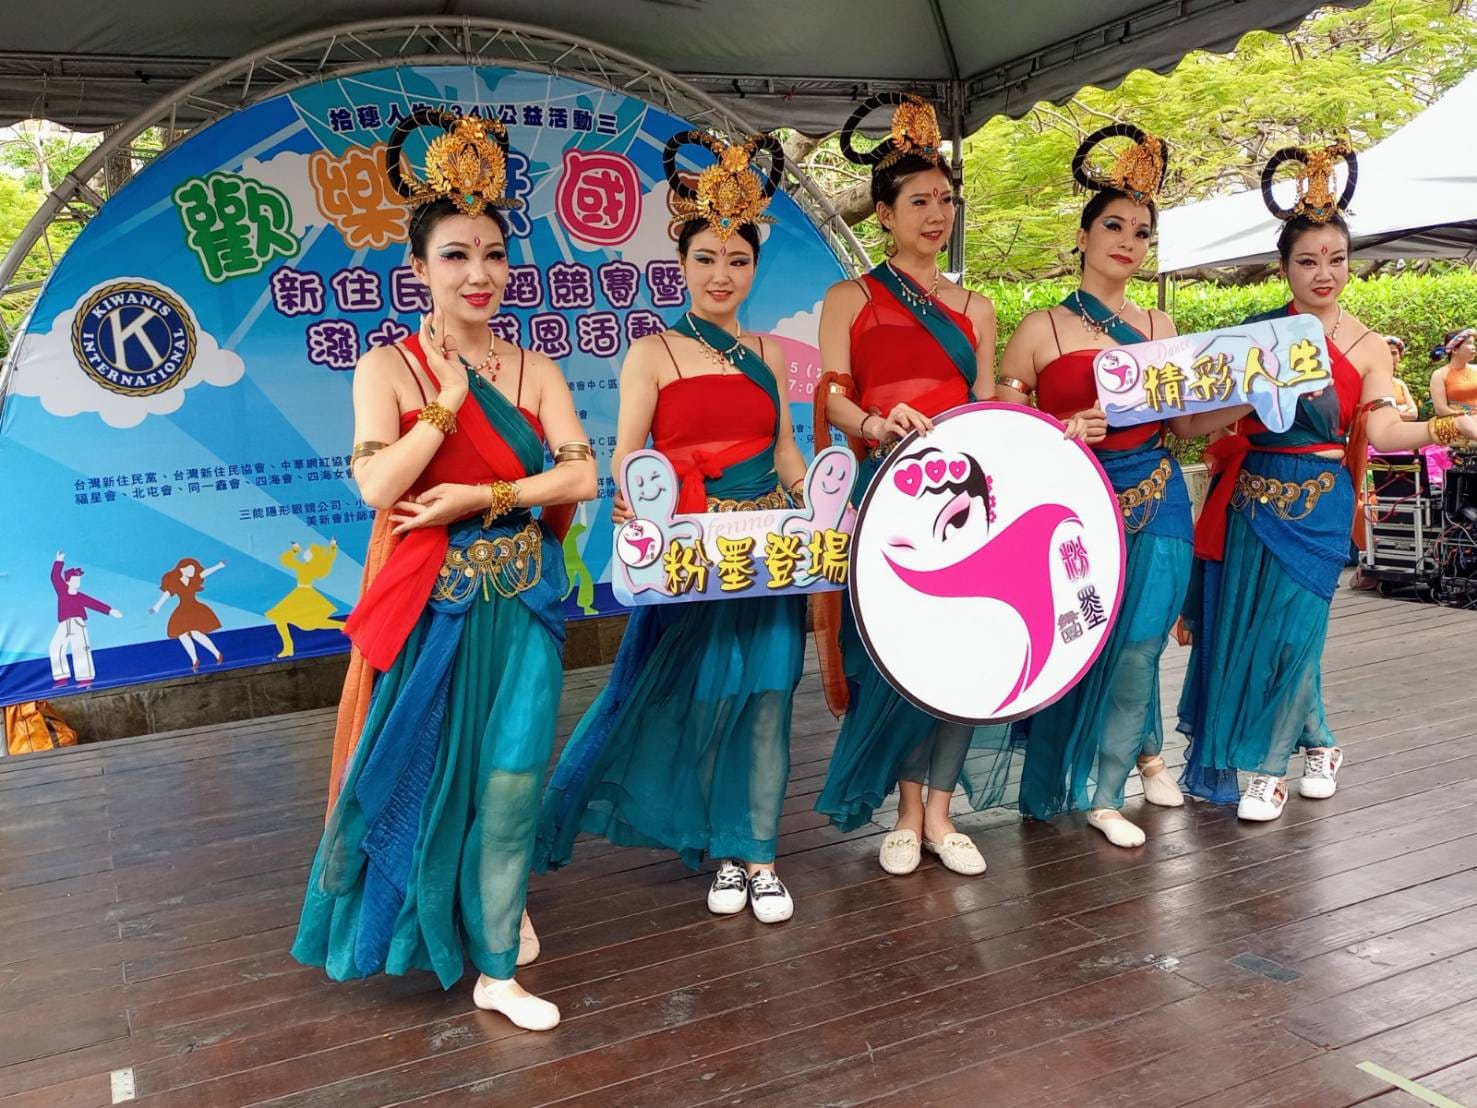 The New Immigrants' Dance Competition and Songkran Festival Activity at Taichung City Dadun Cultural Center. Photo reproduced from Kiwanis International Facebook (聖羅蘭國際同濟會臉書)